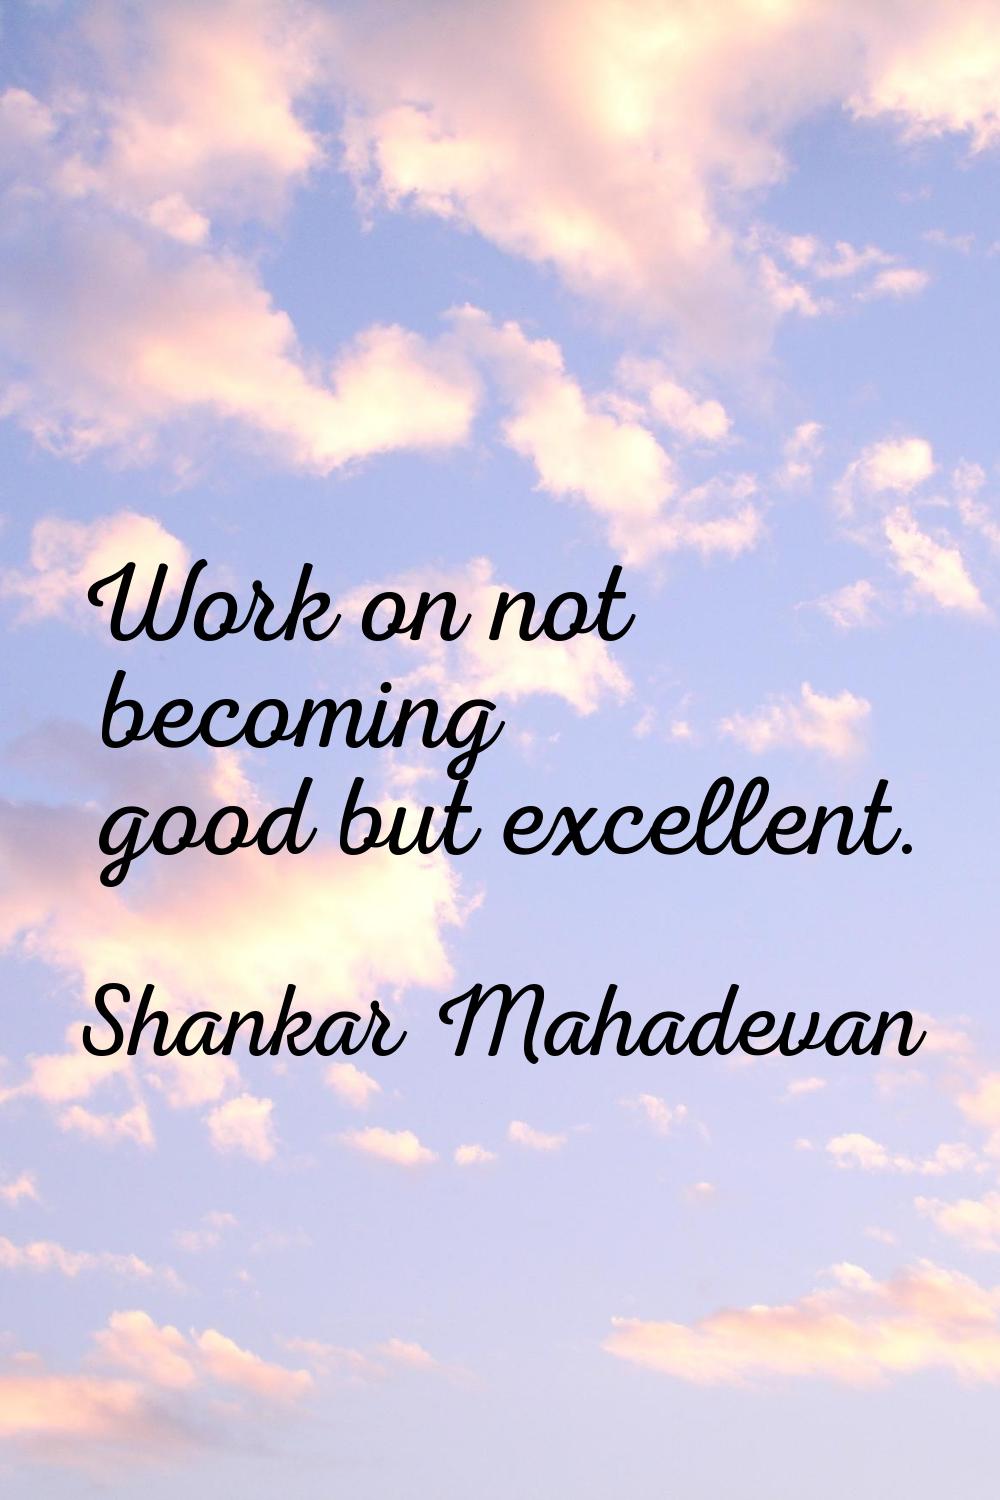 Work on not becoming good but excellent.